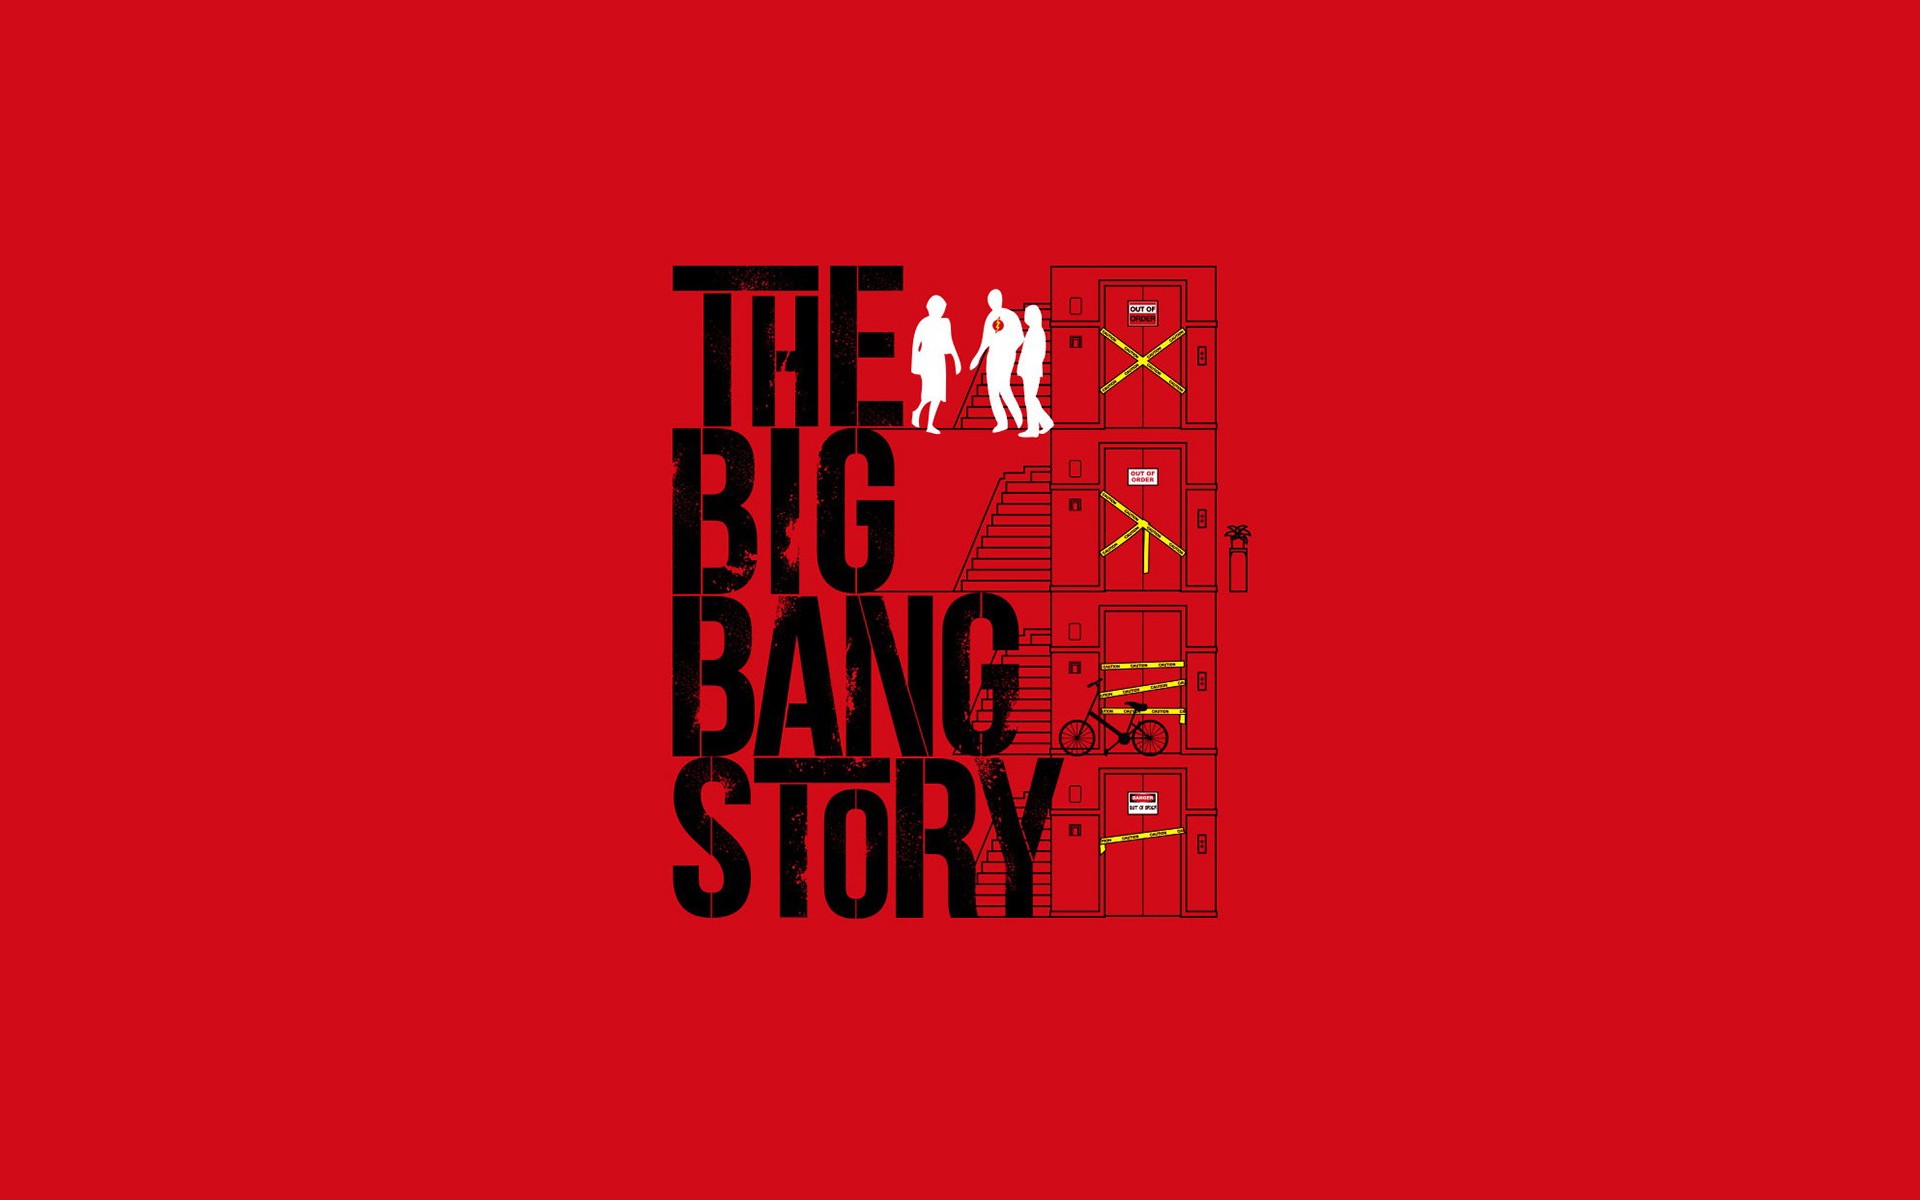 General 1920x1200 fan art The Big Bang Theory TV series red background digital art simple background